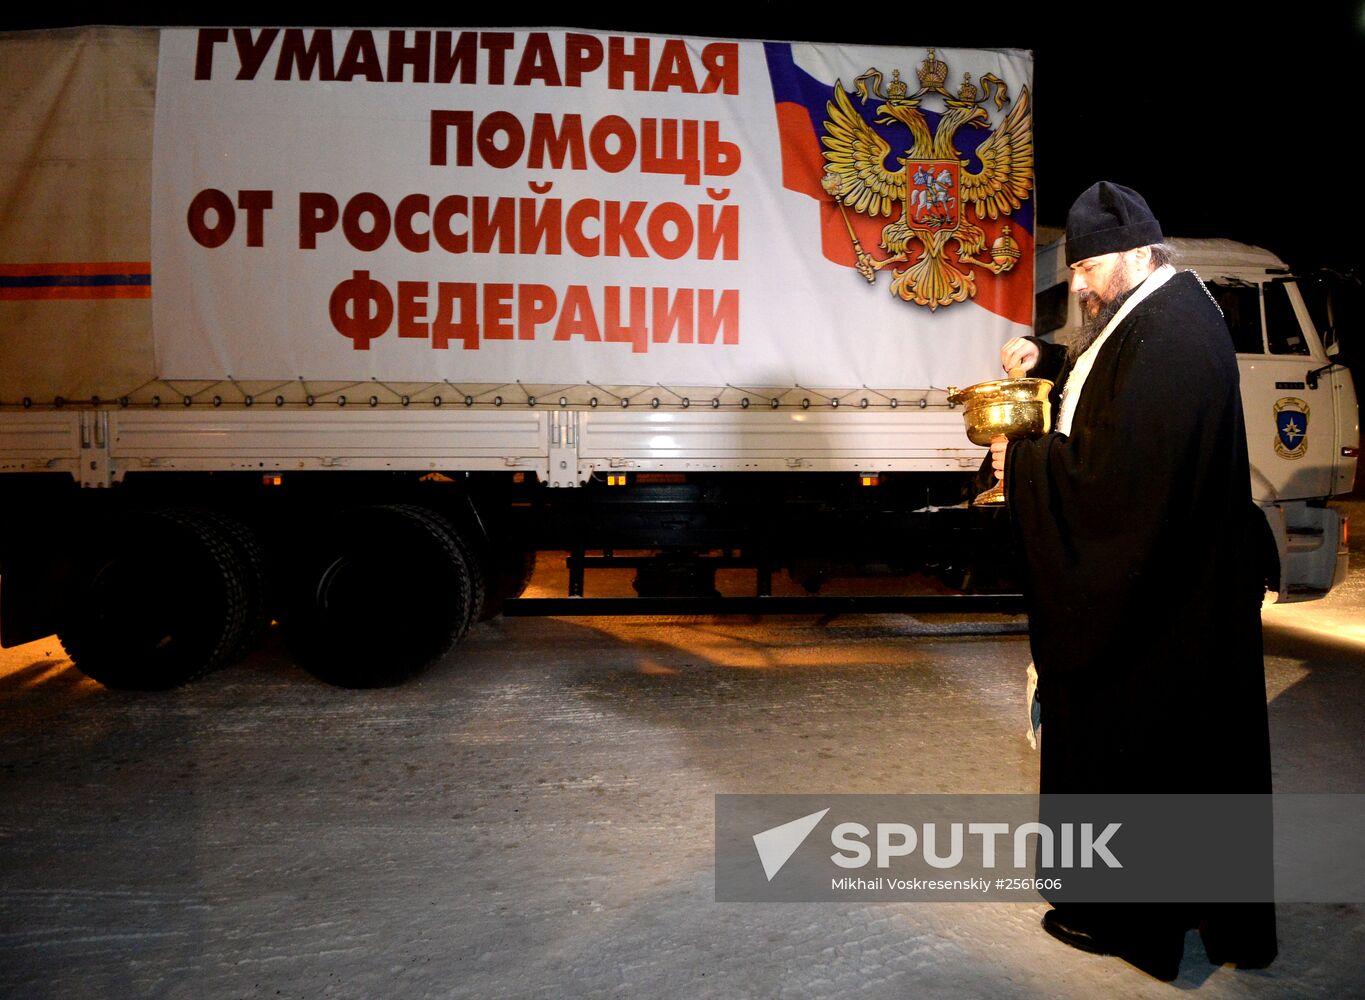 Humanitarian aid sent to Donetsk and Lugansk regions